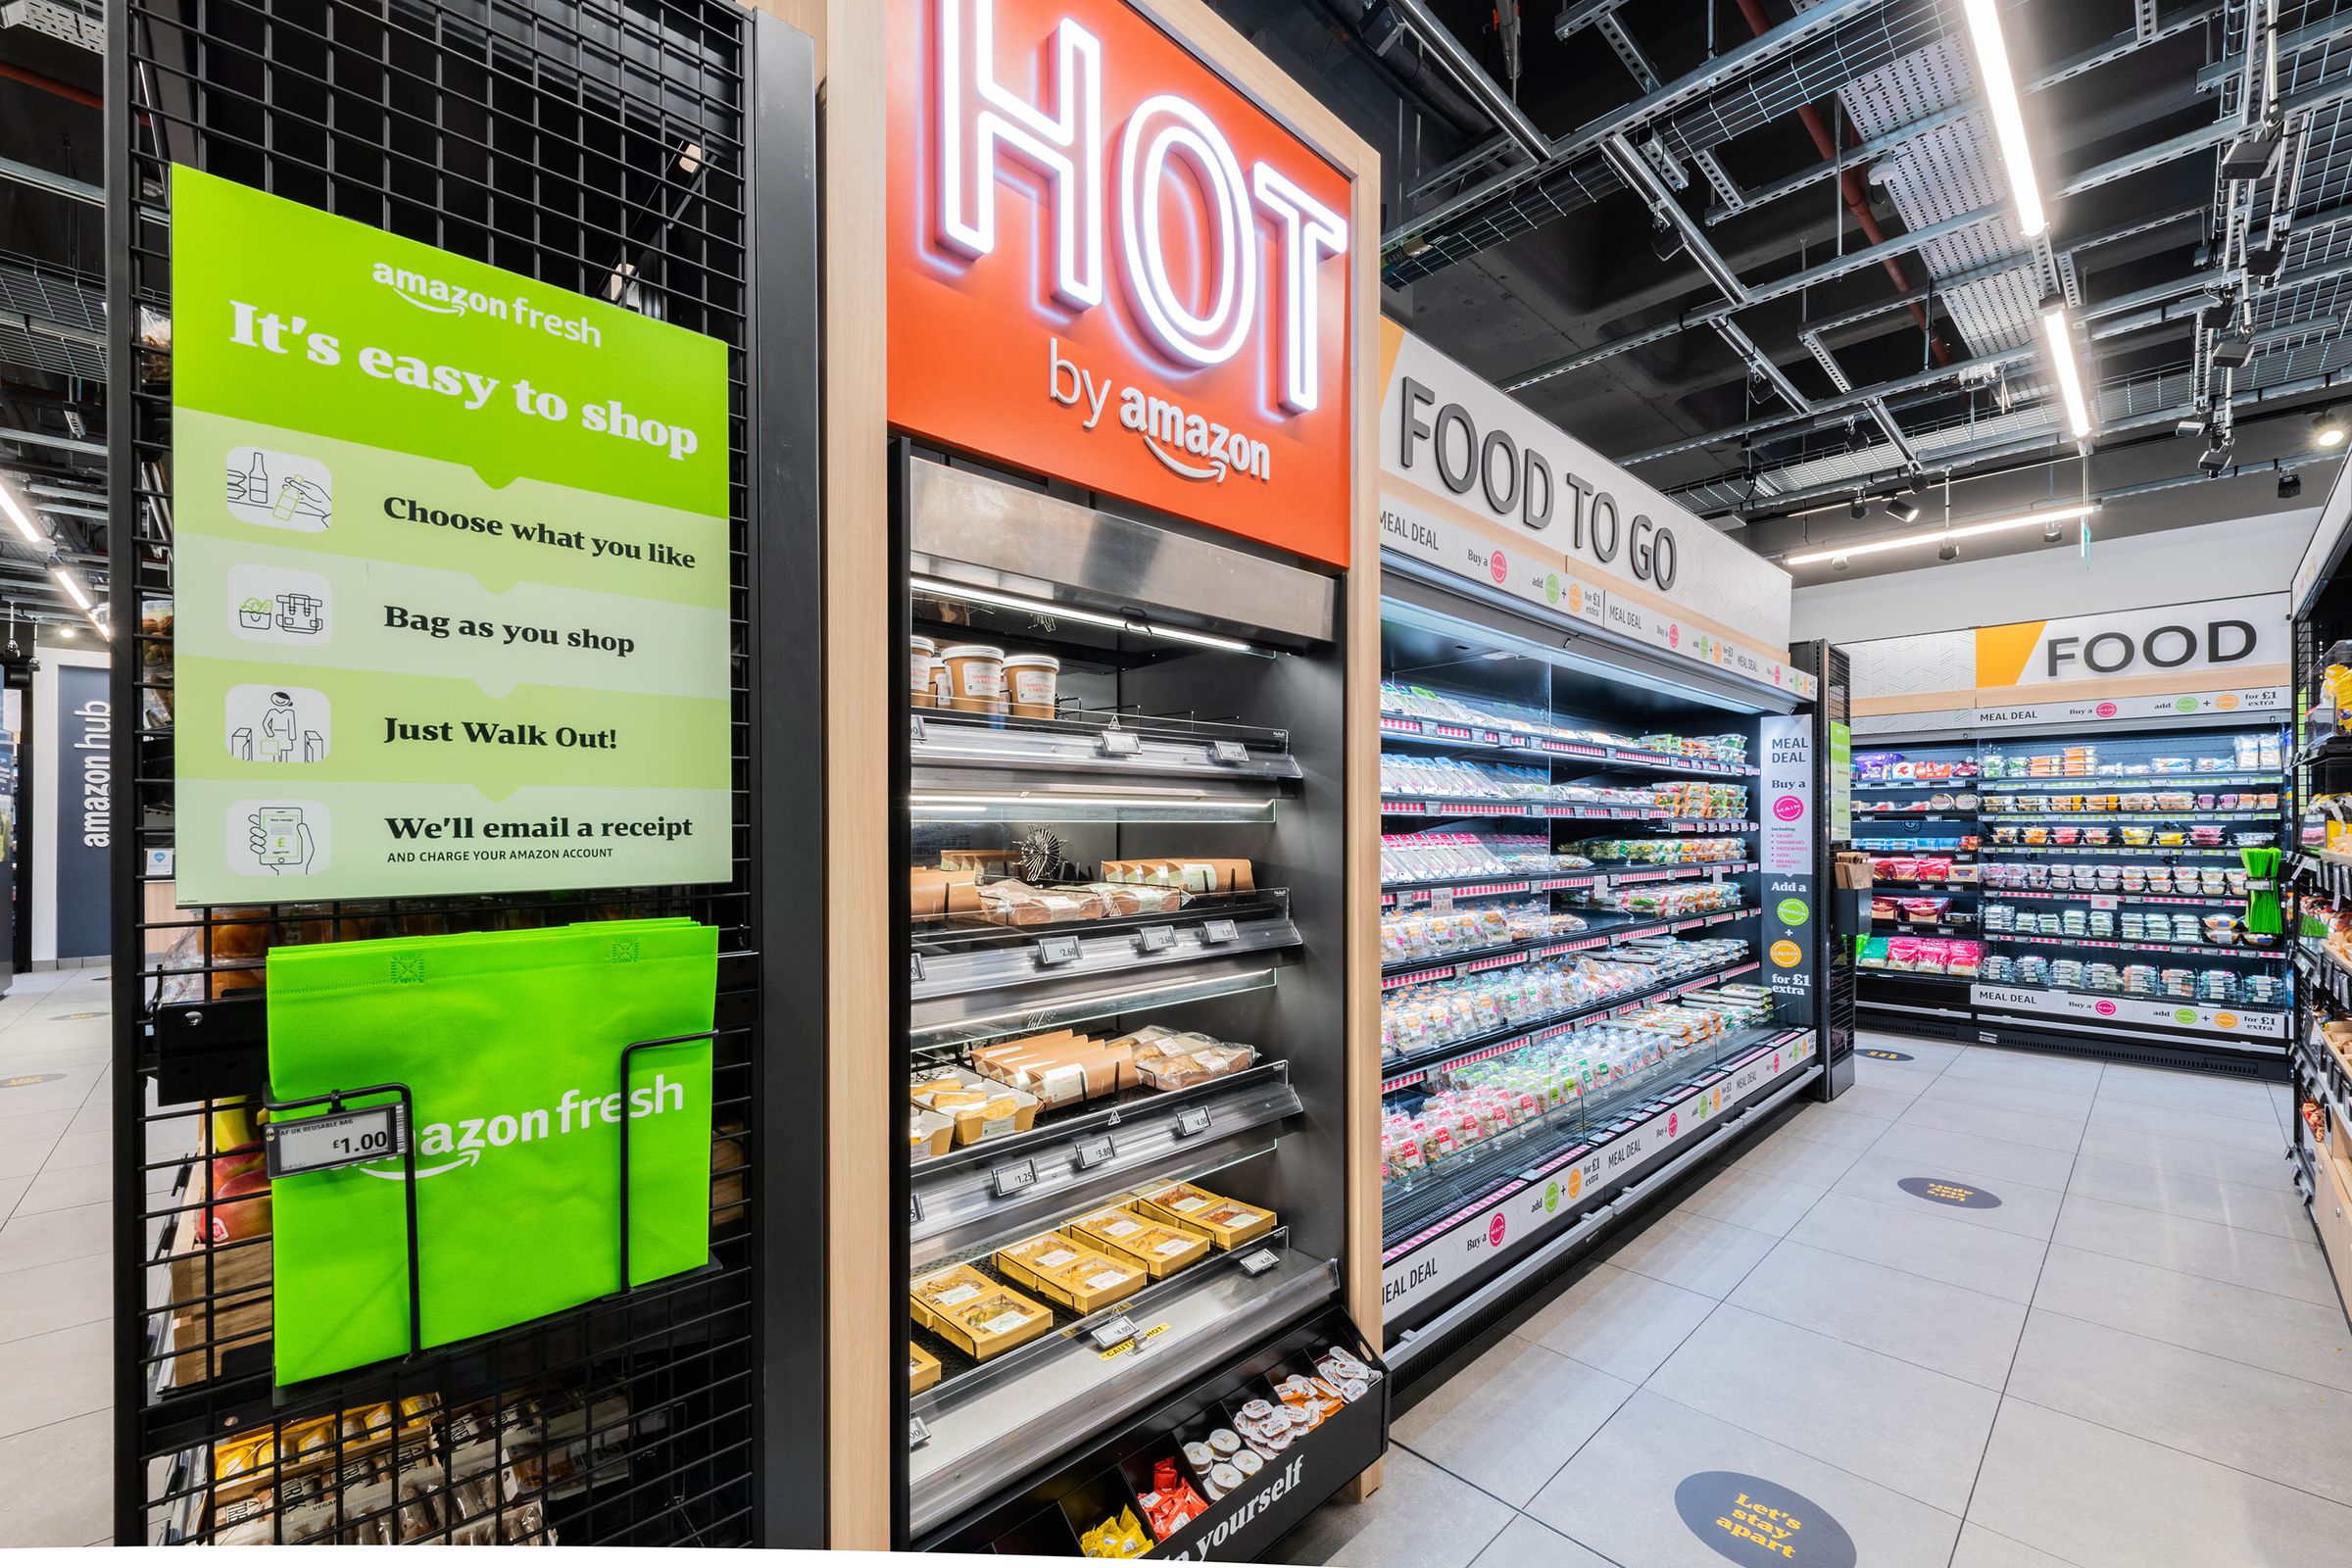 The store will sell hot and cold food, as well as other everyday essentials.